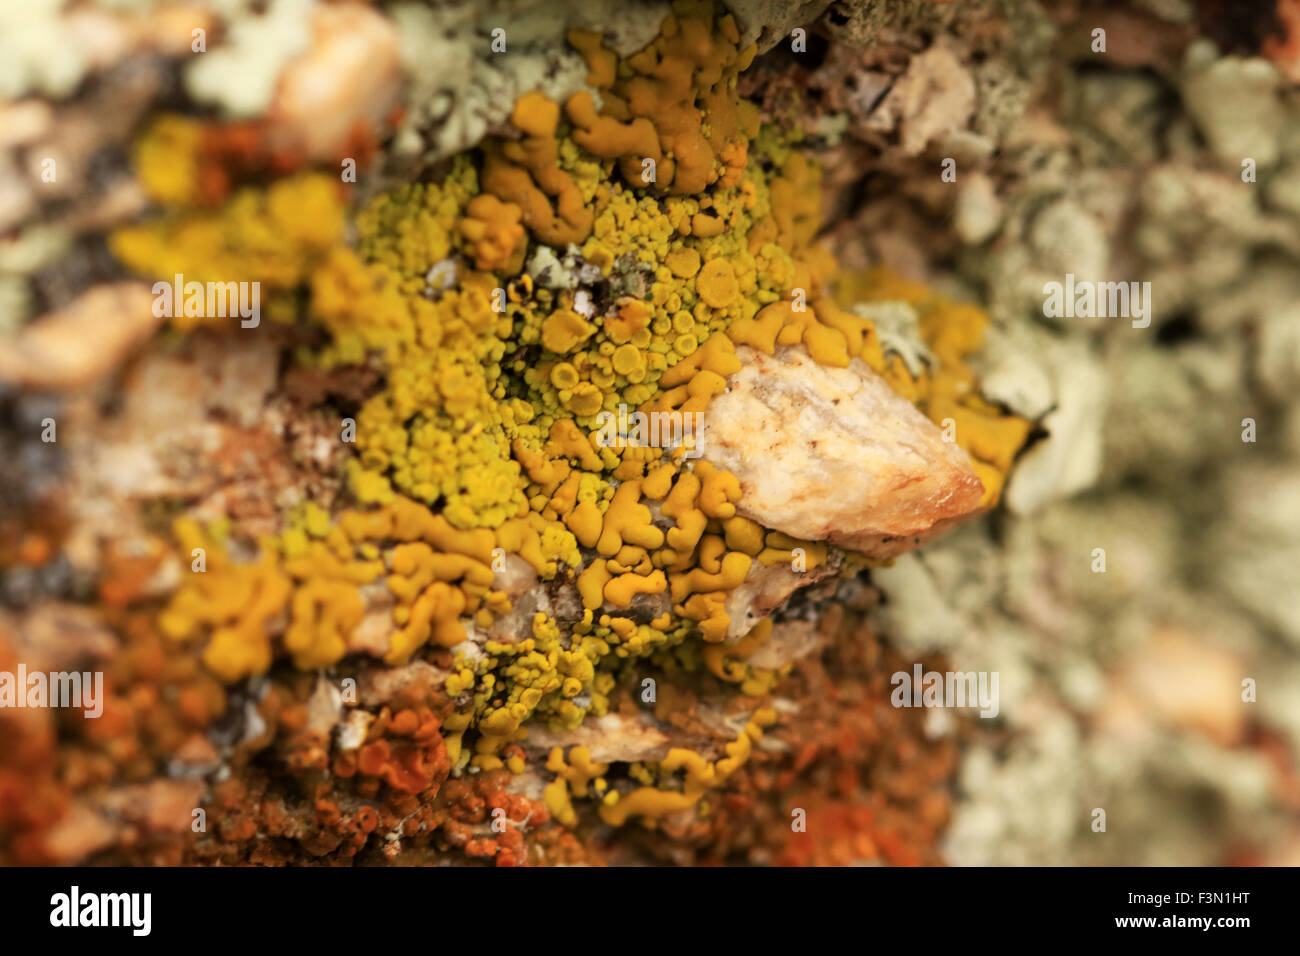 Fungus growing on some rocks in the Tucson desert Stock Photo